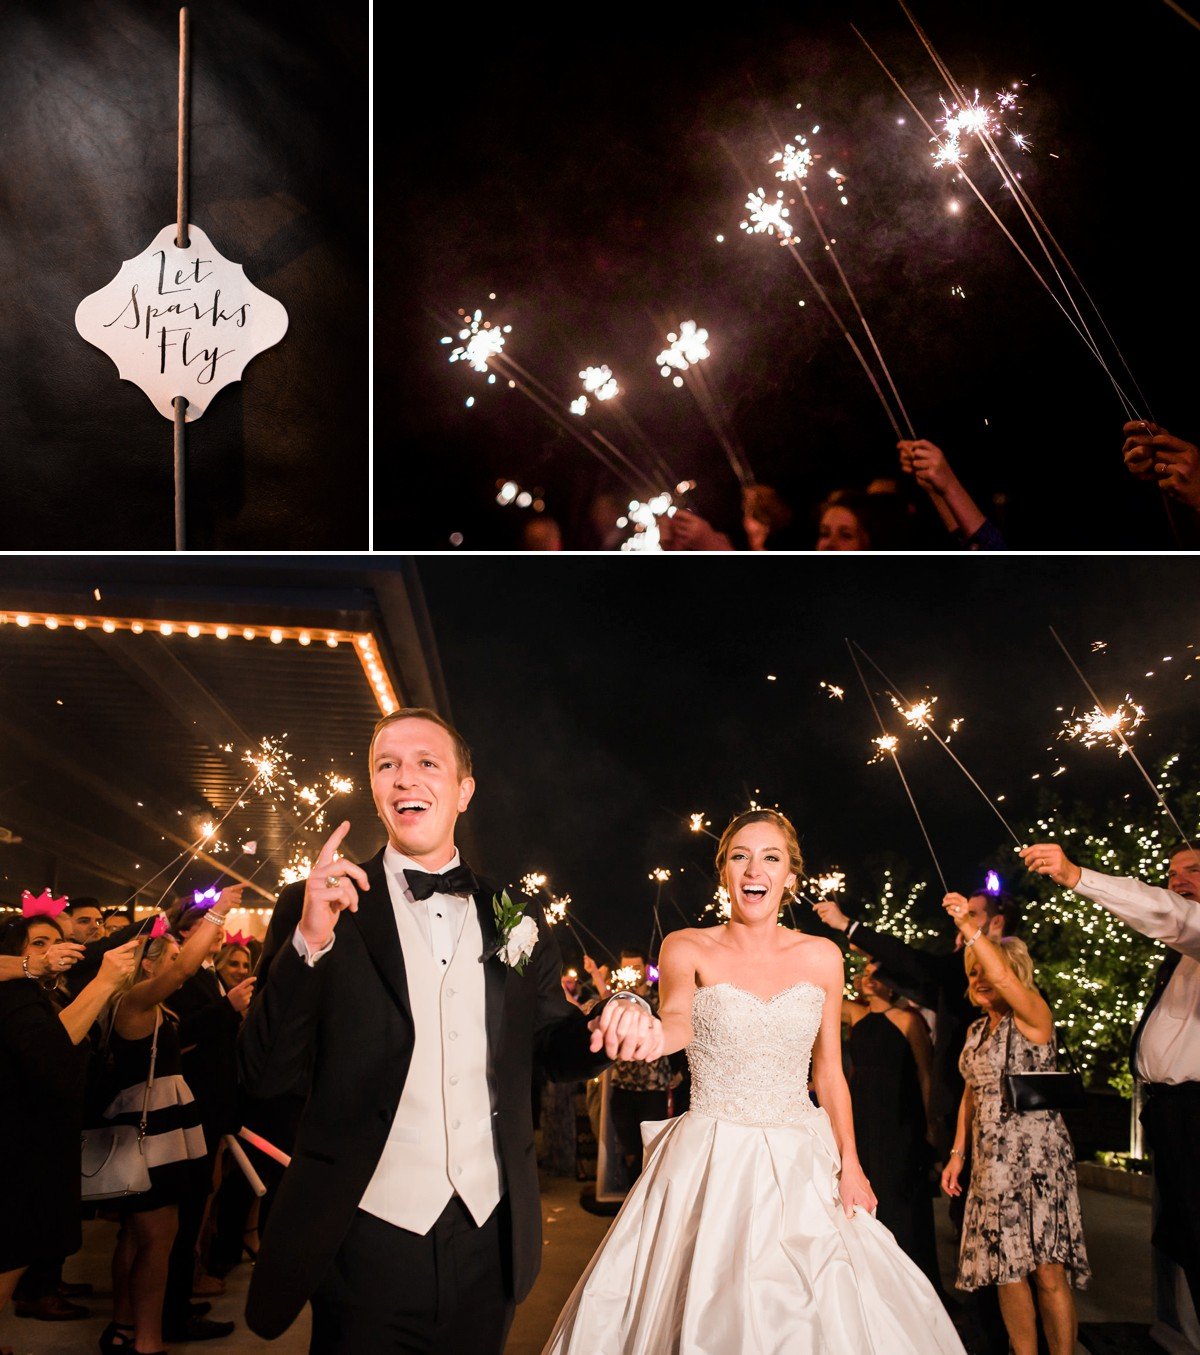 Our Top 5 Tips for an Amazing Sparkler Wedding Exit!